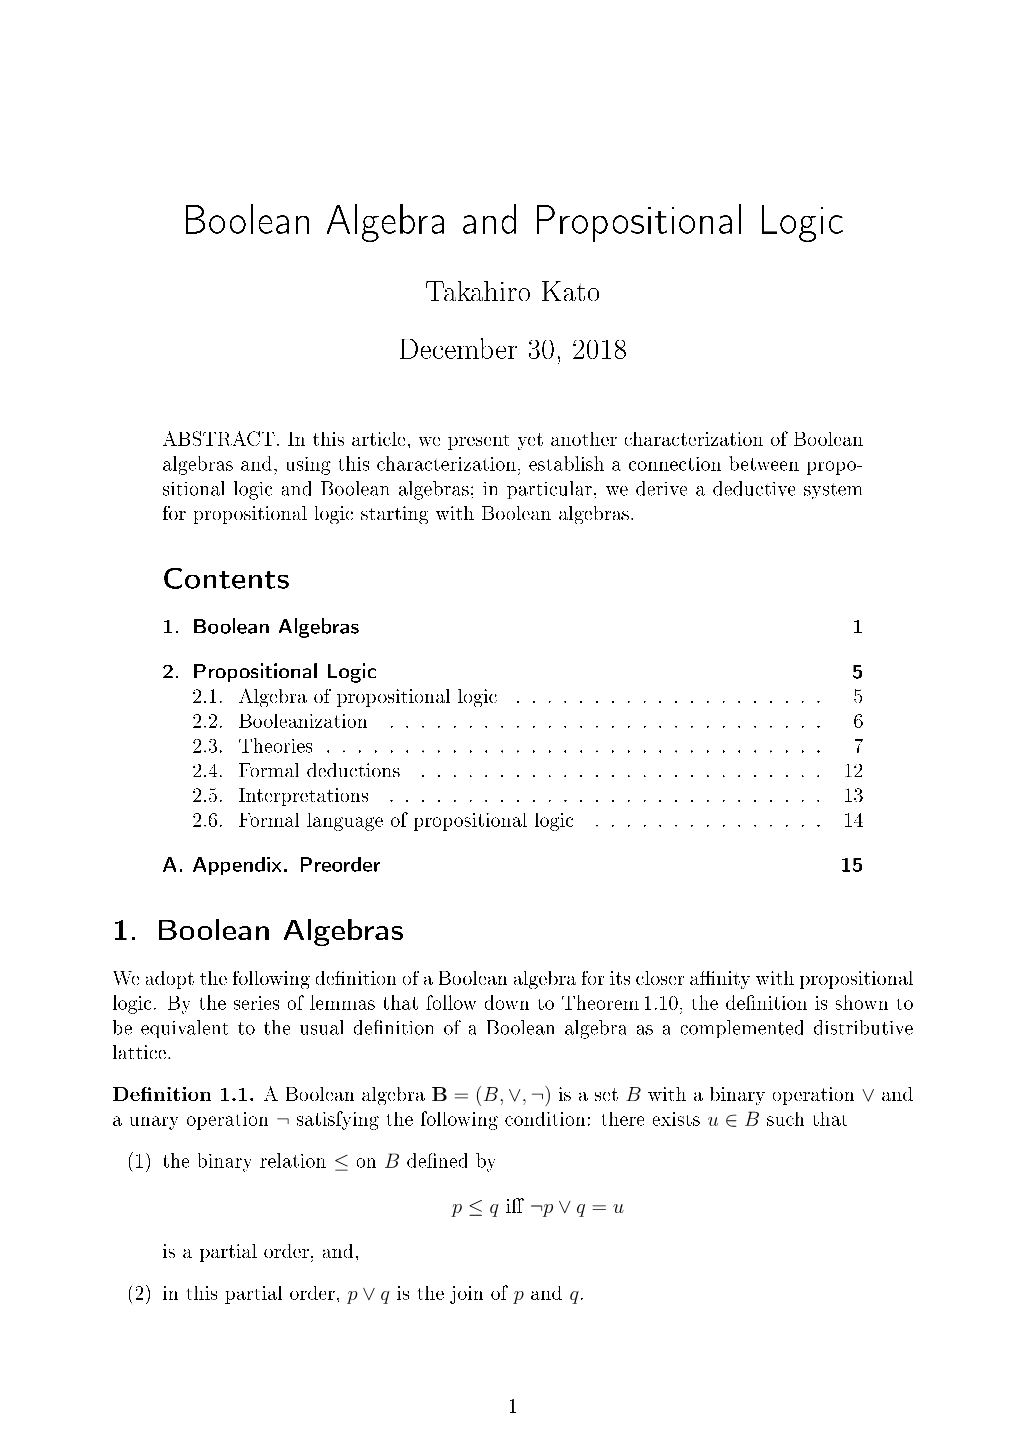 Boolean Algebra and Propositional Logic